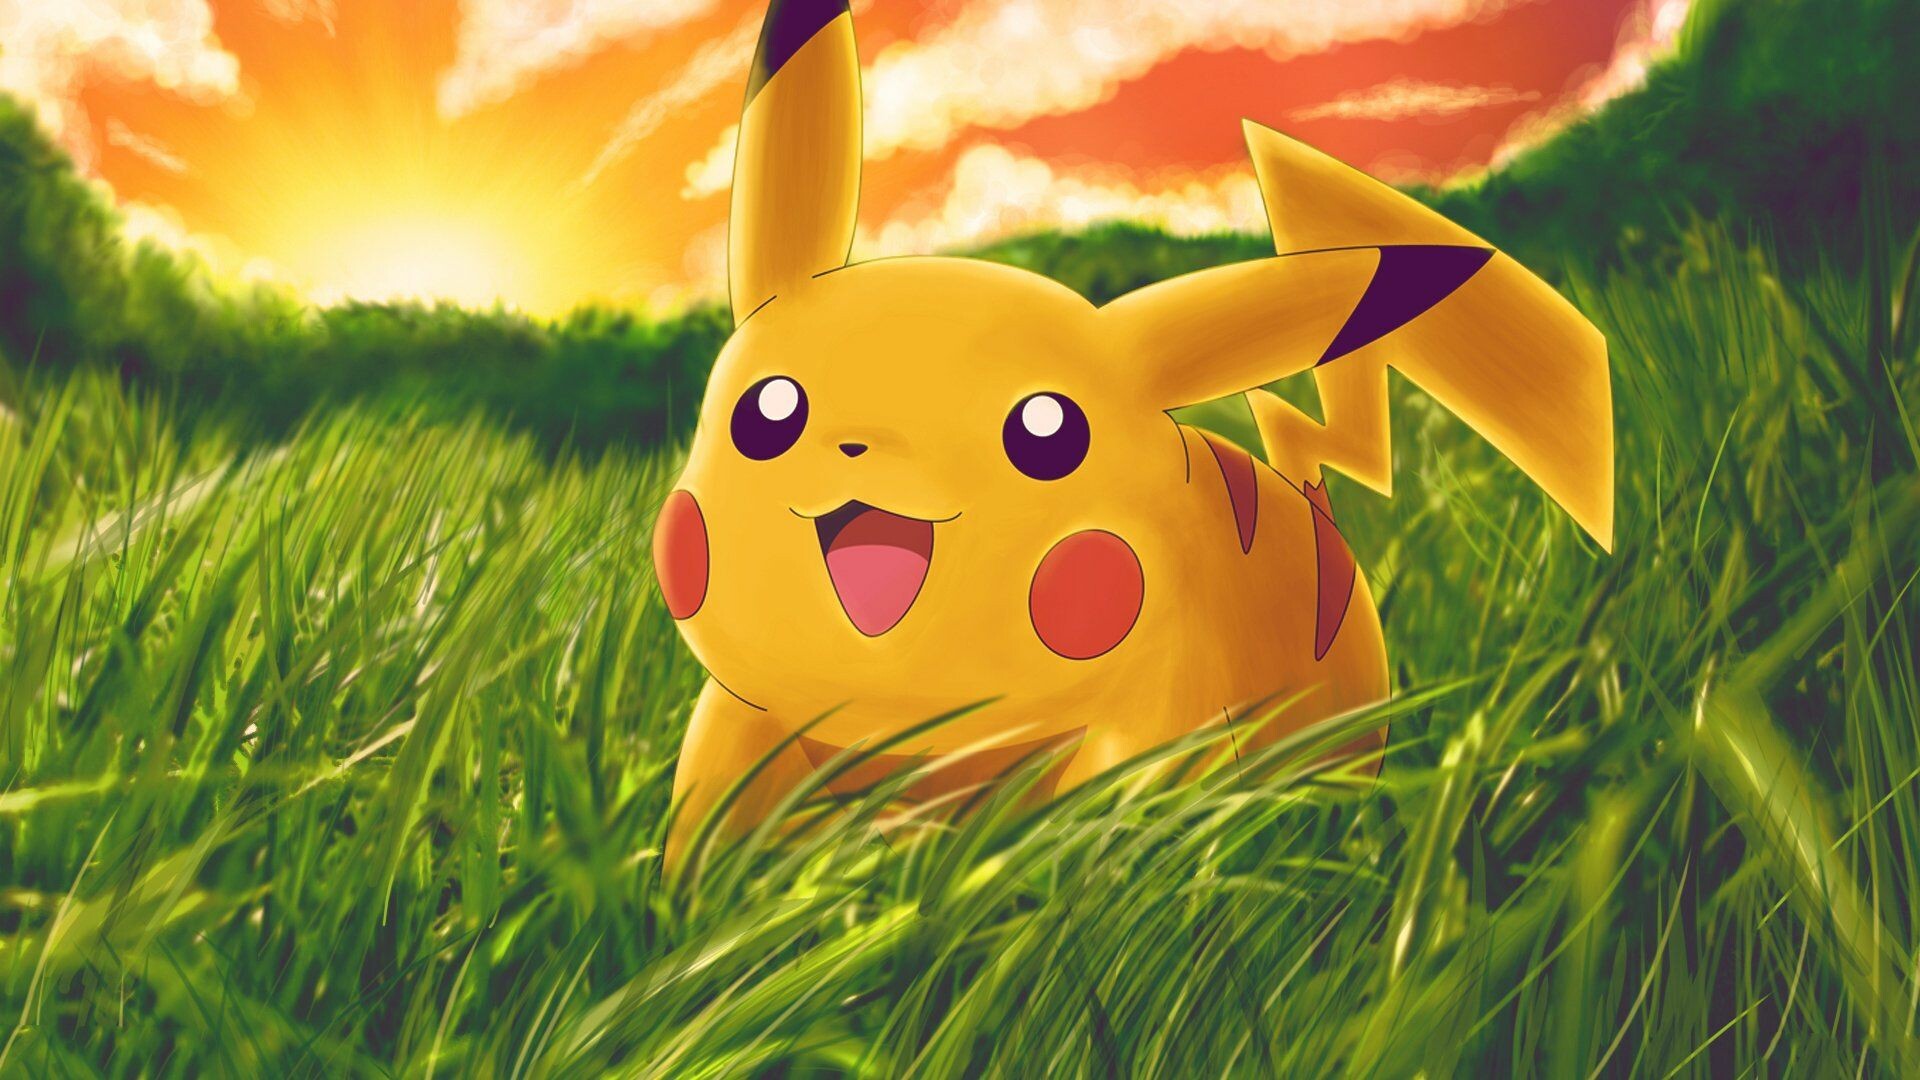 58+ Pikachu Wallpapers: HD, 4K, 5K for PC and Mobile | Download free images  for iPhone, Android